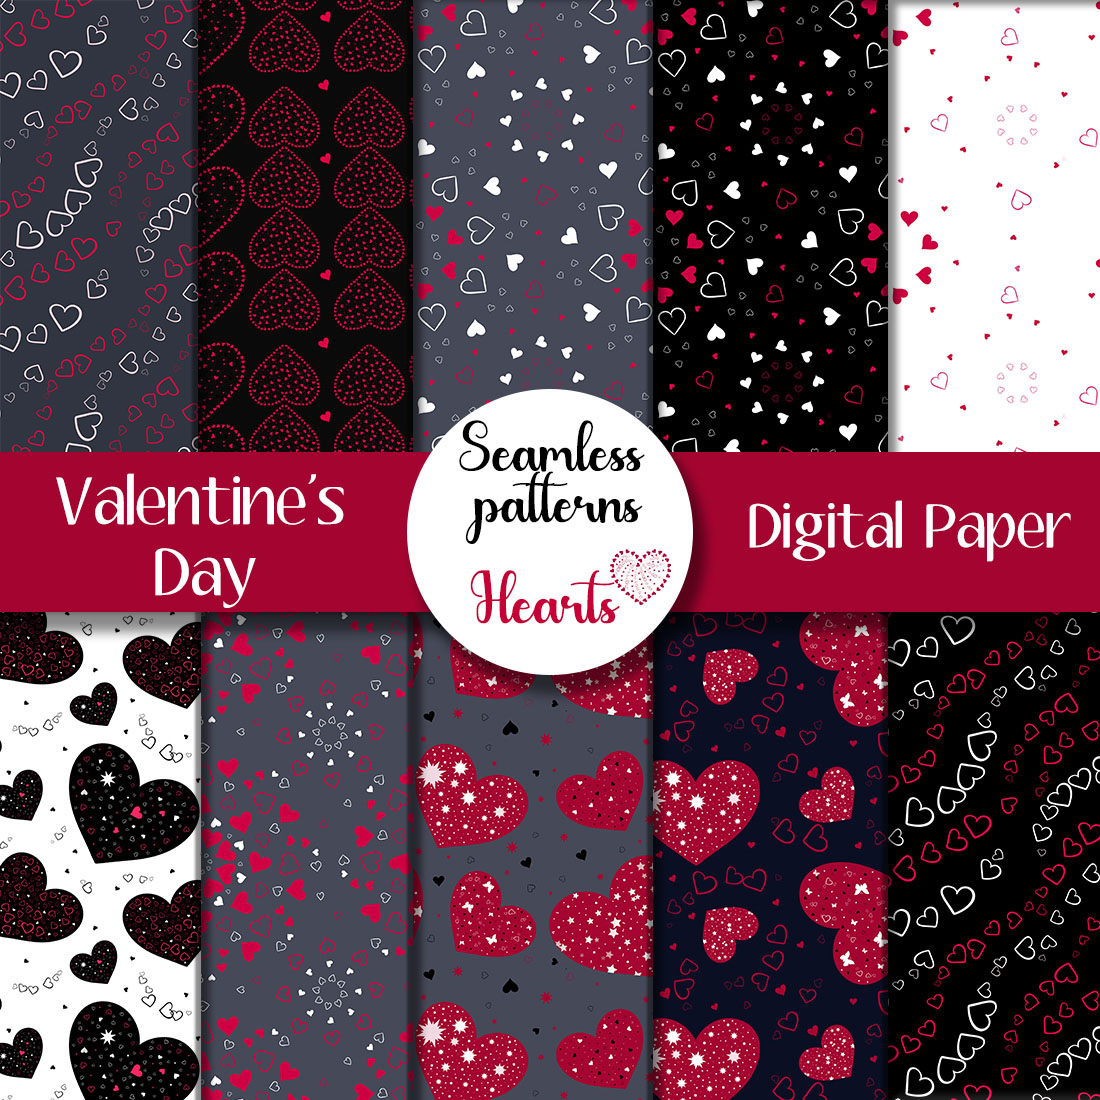 Red Hearts Valentines Day Seamless Template cover image.